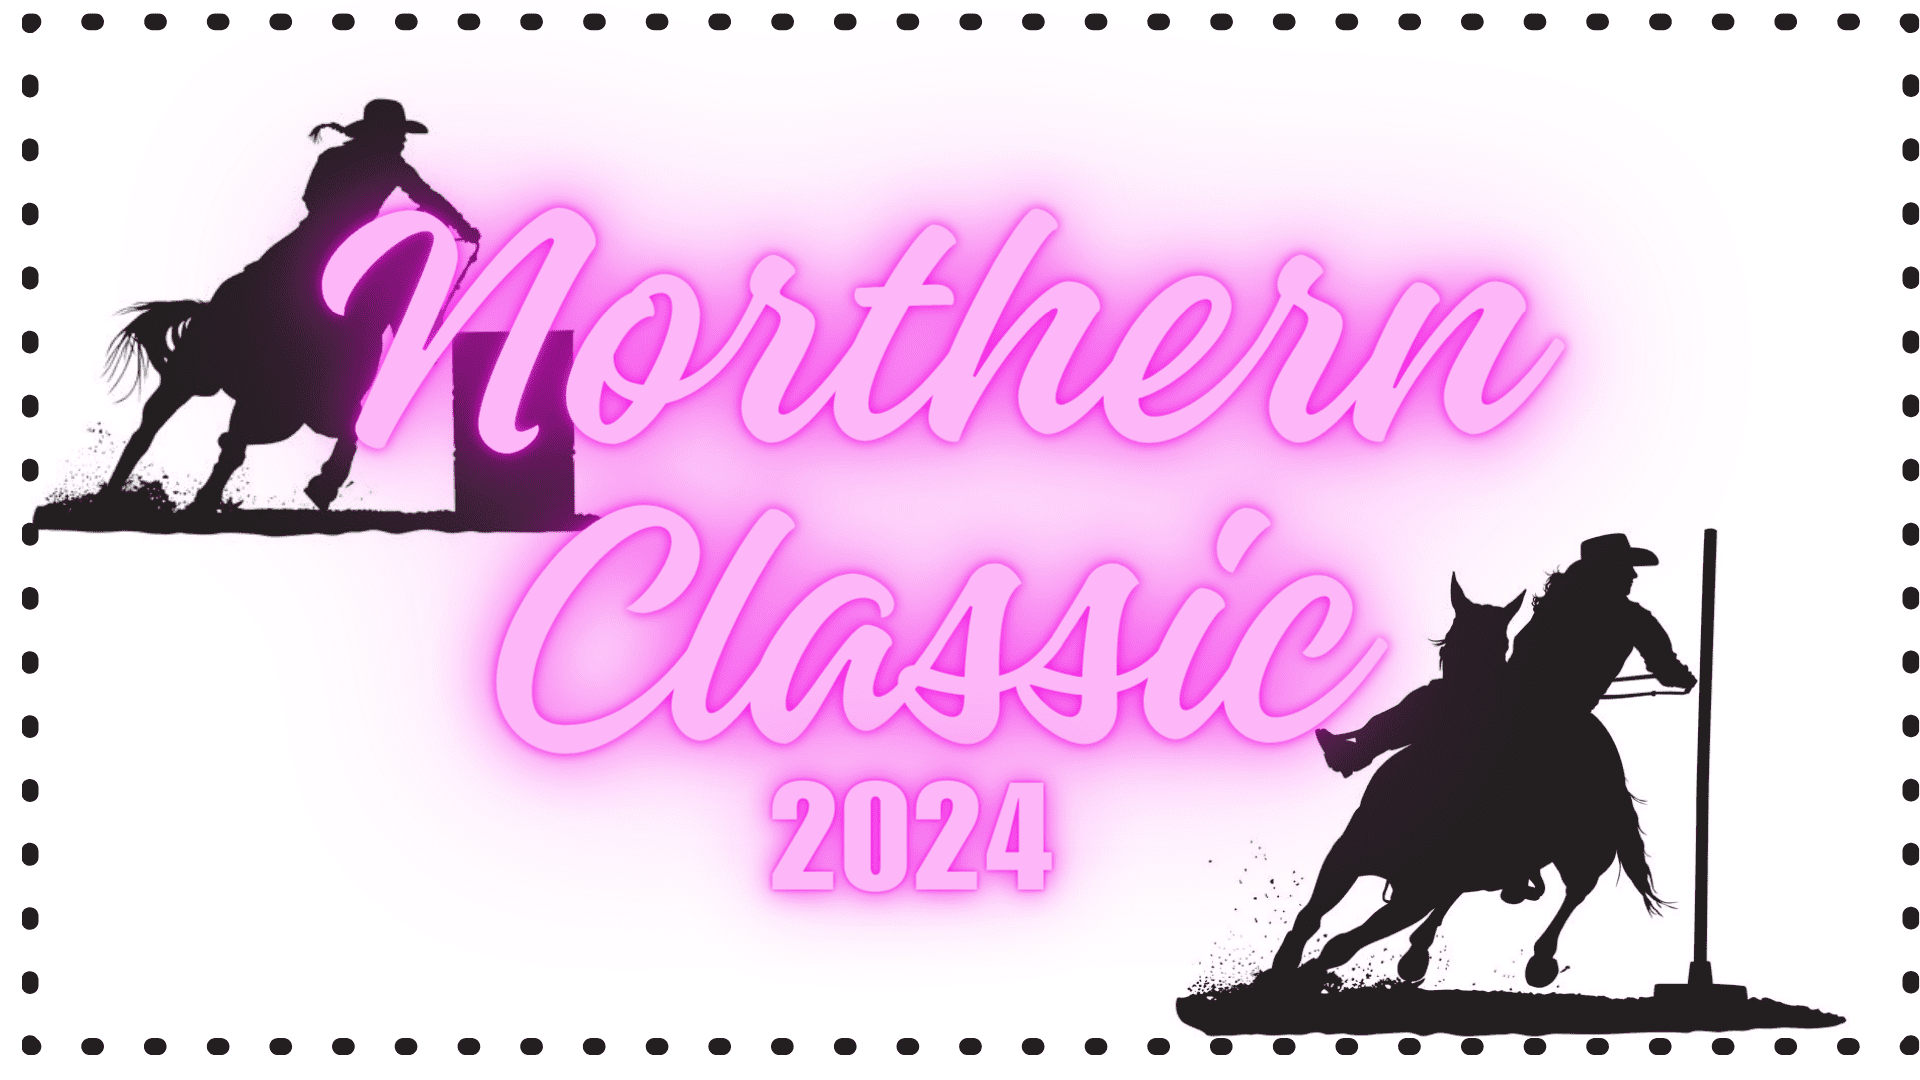 Northern-Classic.png